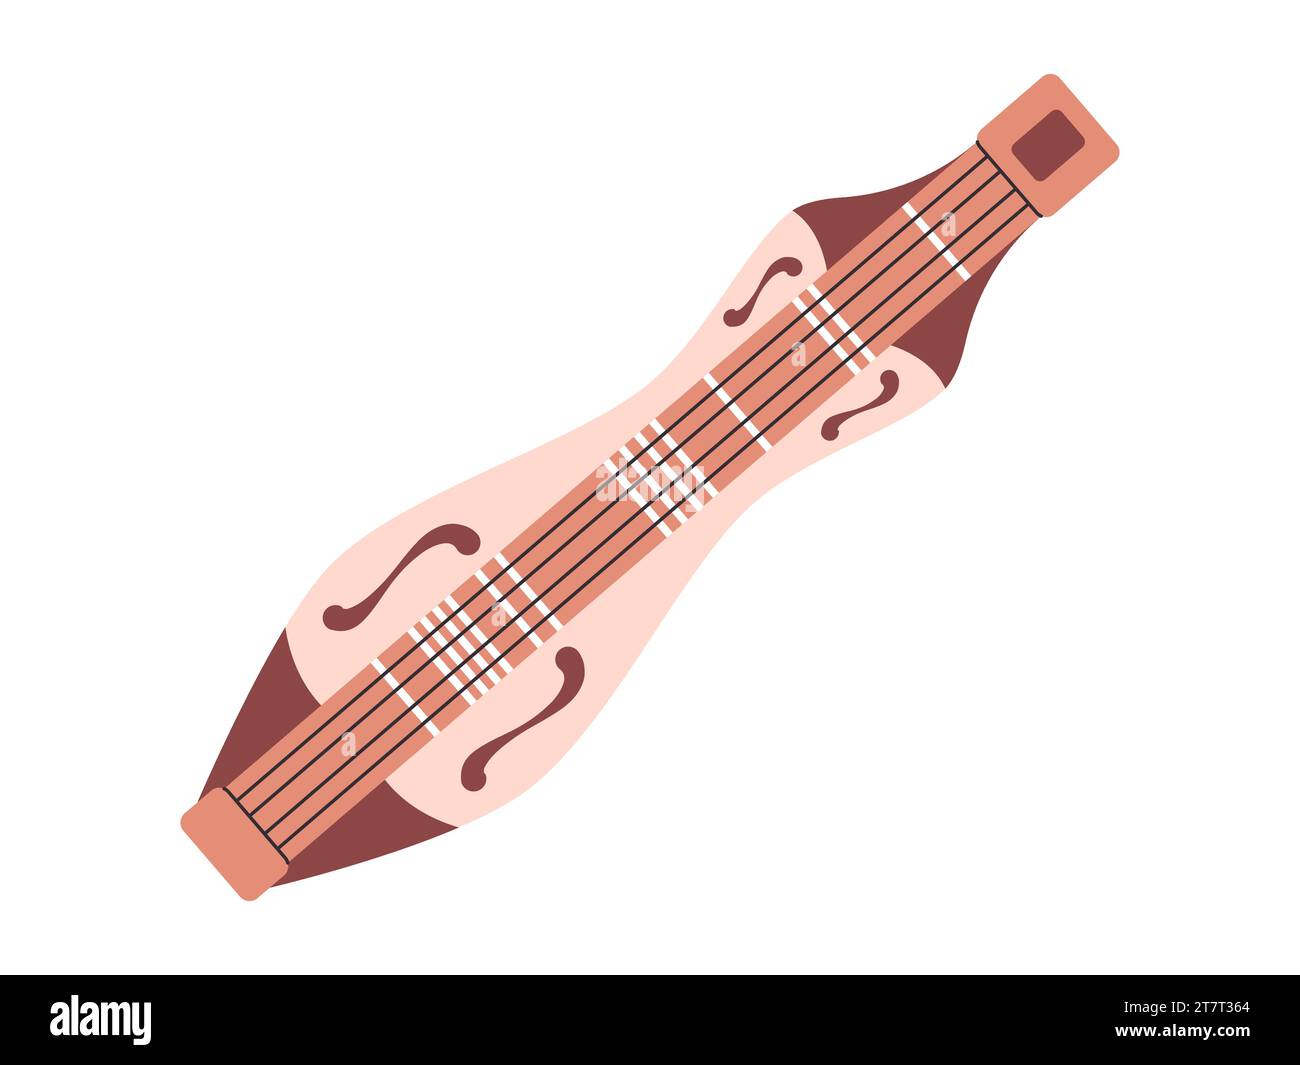 brown color appalachian dulcimer ancient musical instrument equipment play traditional folk music vintage Stock Vector